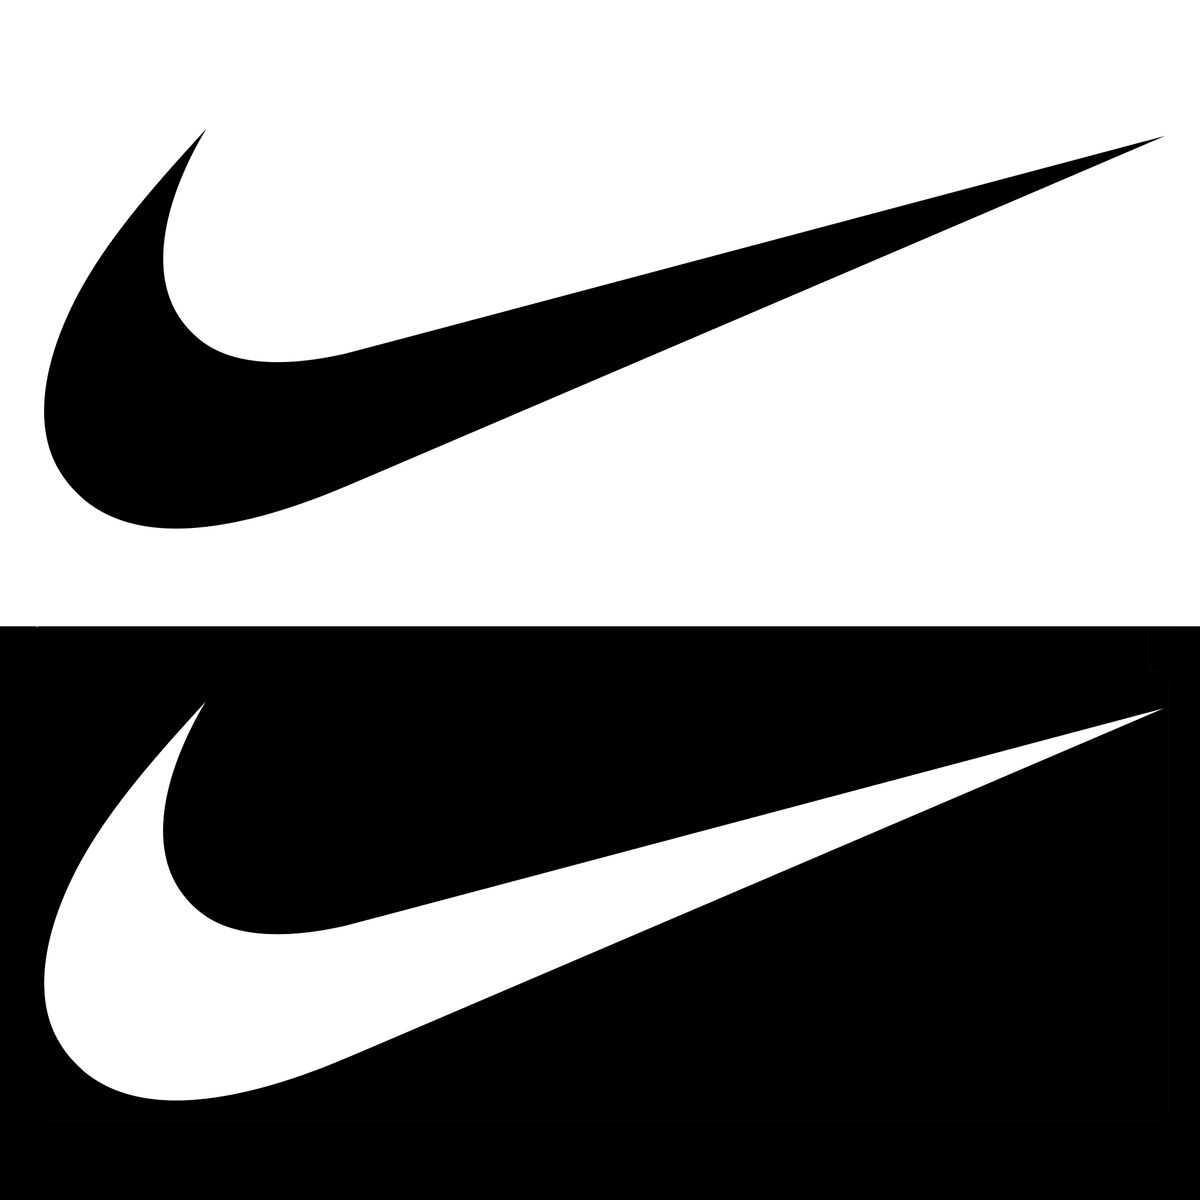 7 famous logos that pass the silhouette test | Creative Bloq